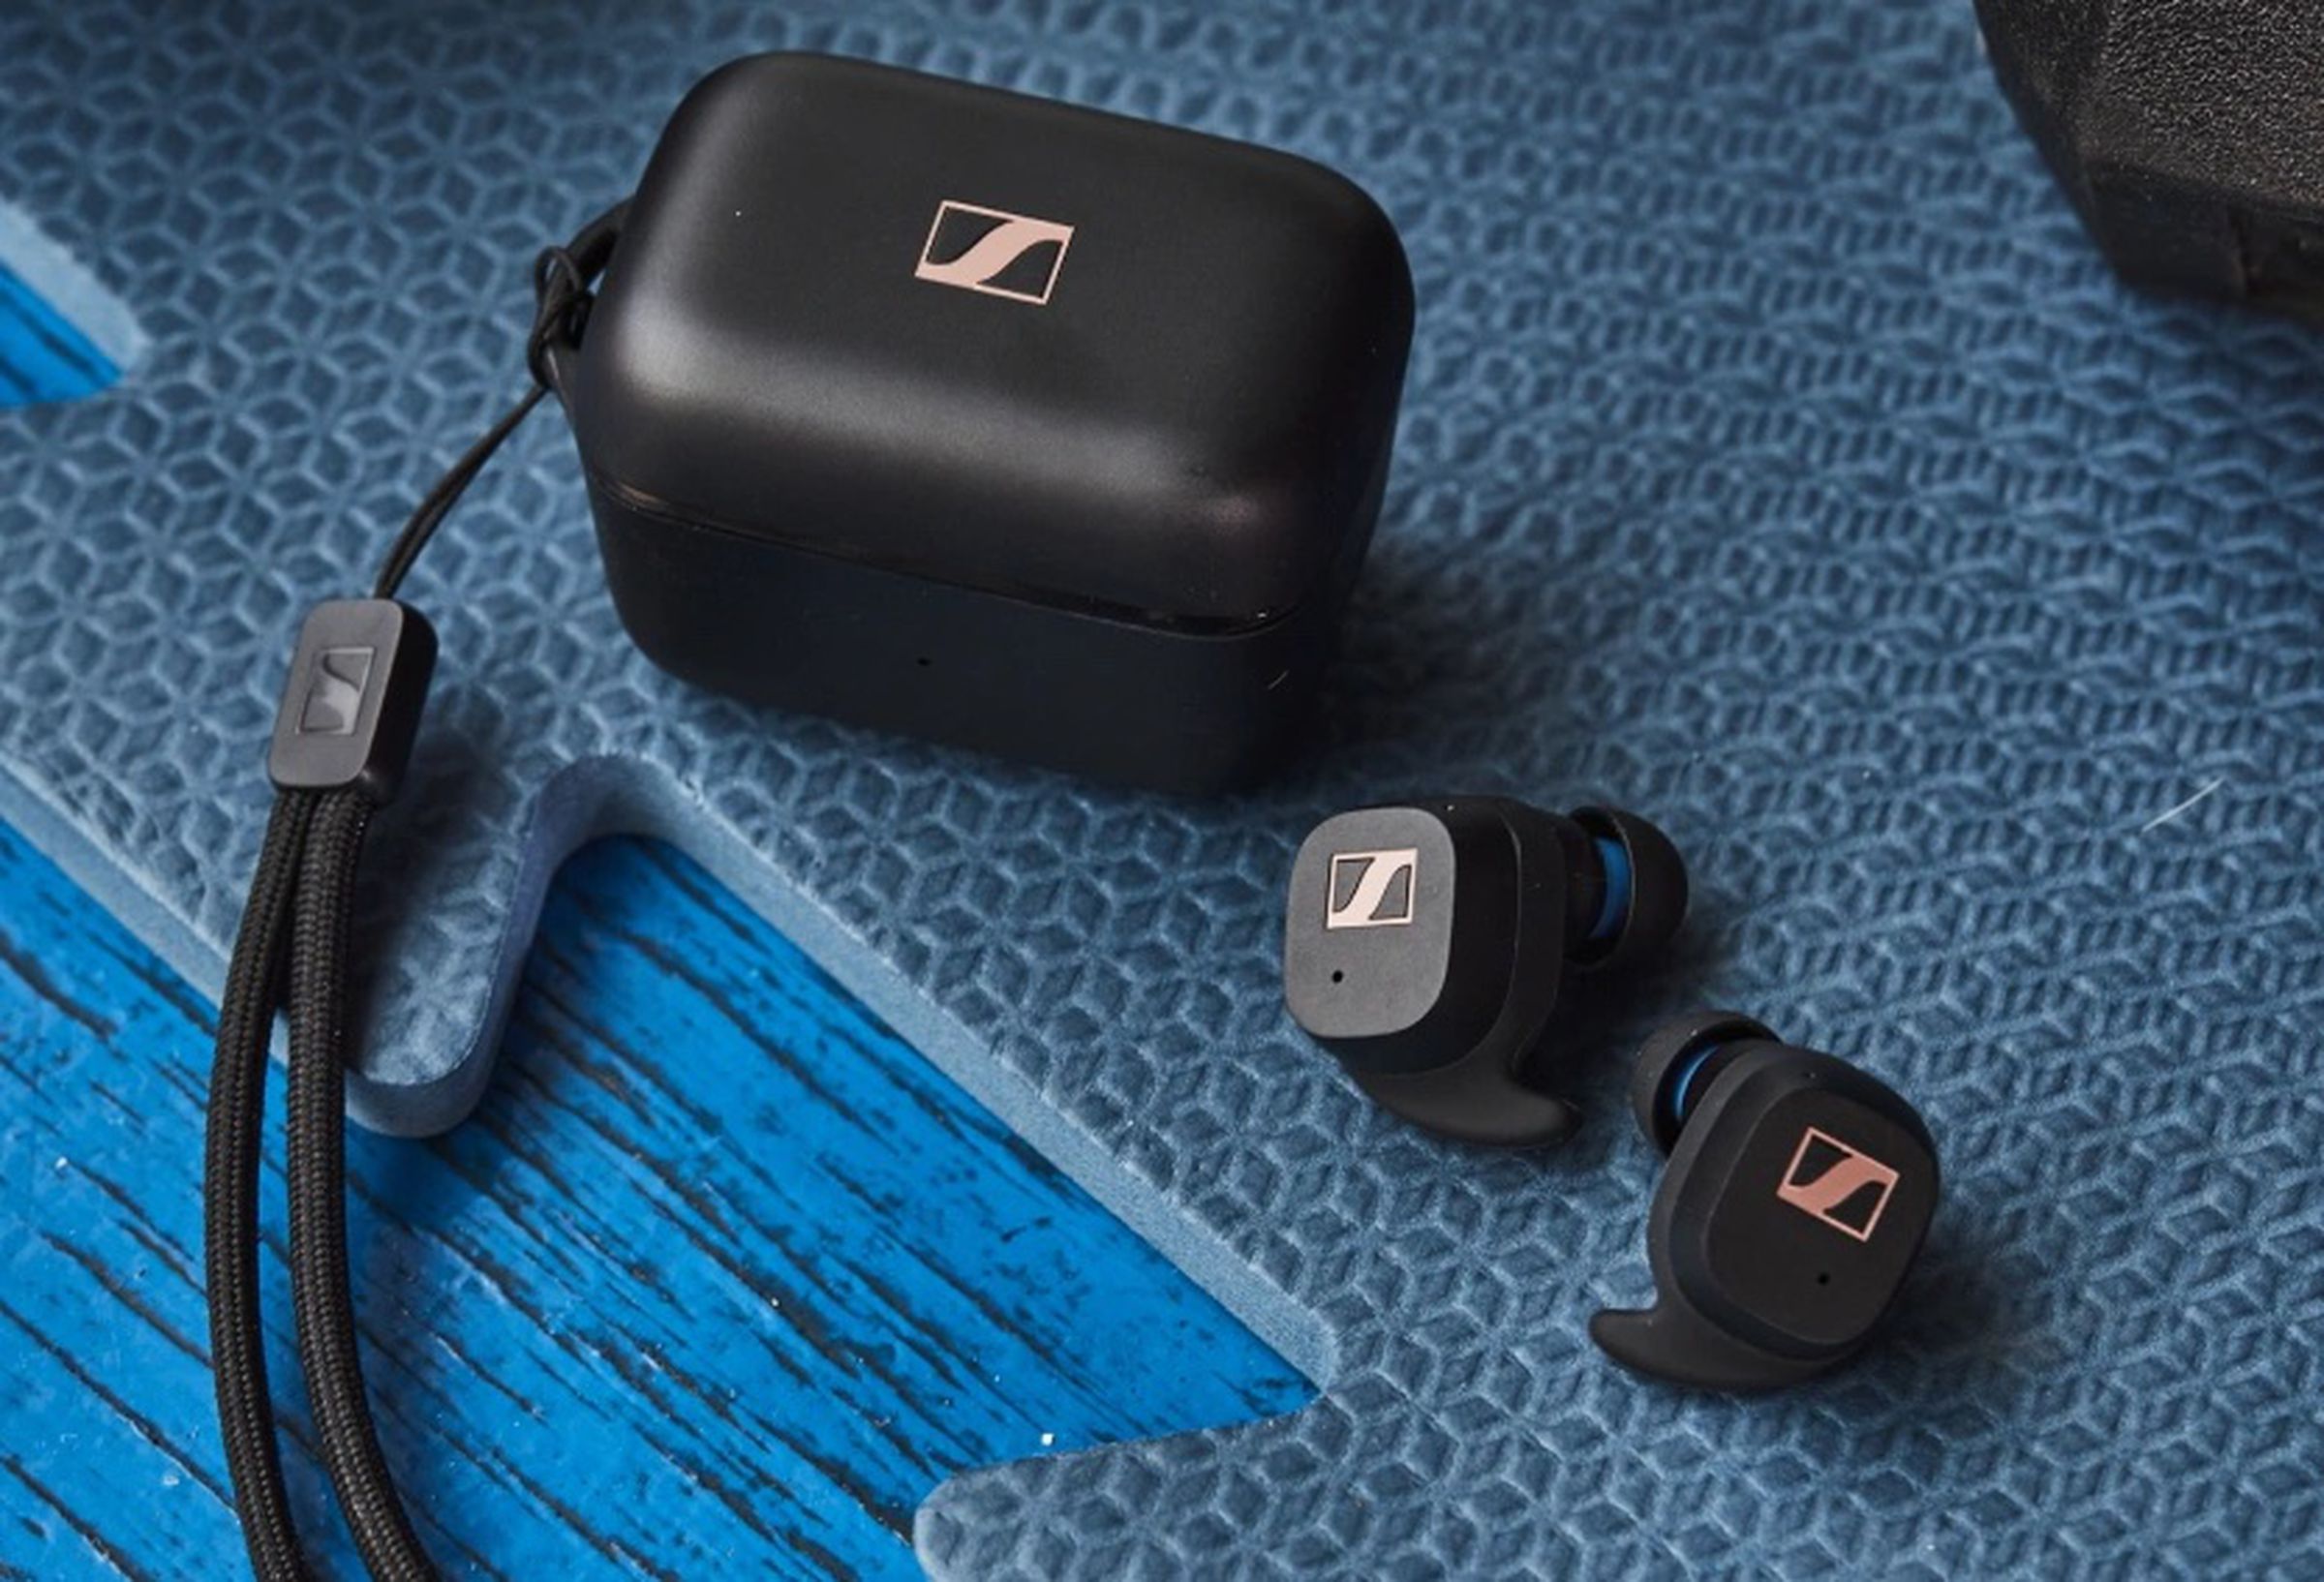 Sennheiser is aiming to lure in the fitness crowd with its also-new Sport True Wireless earbuds.